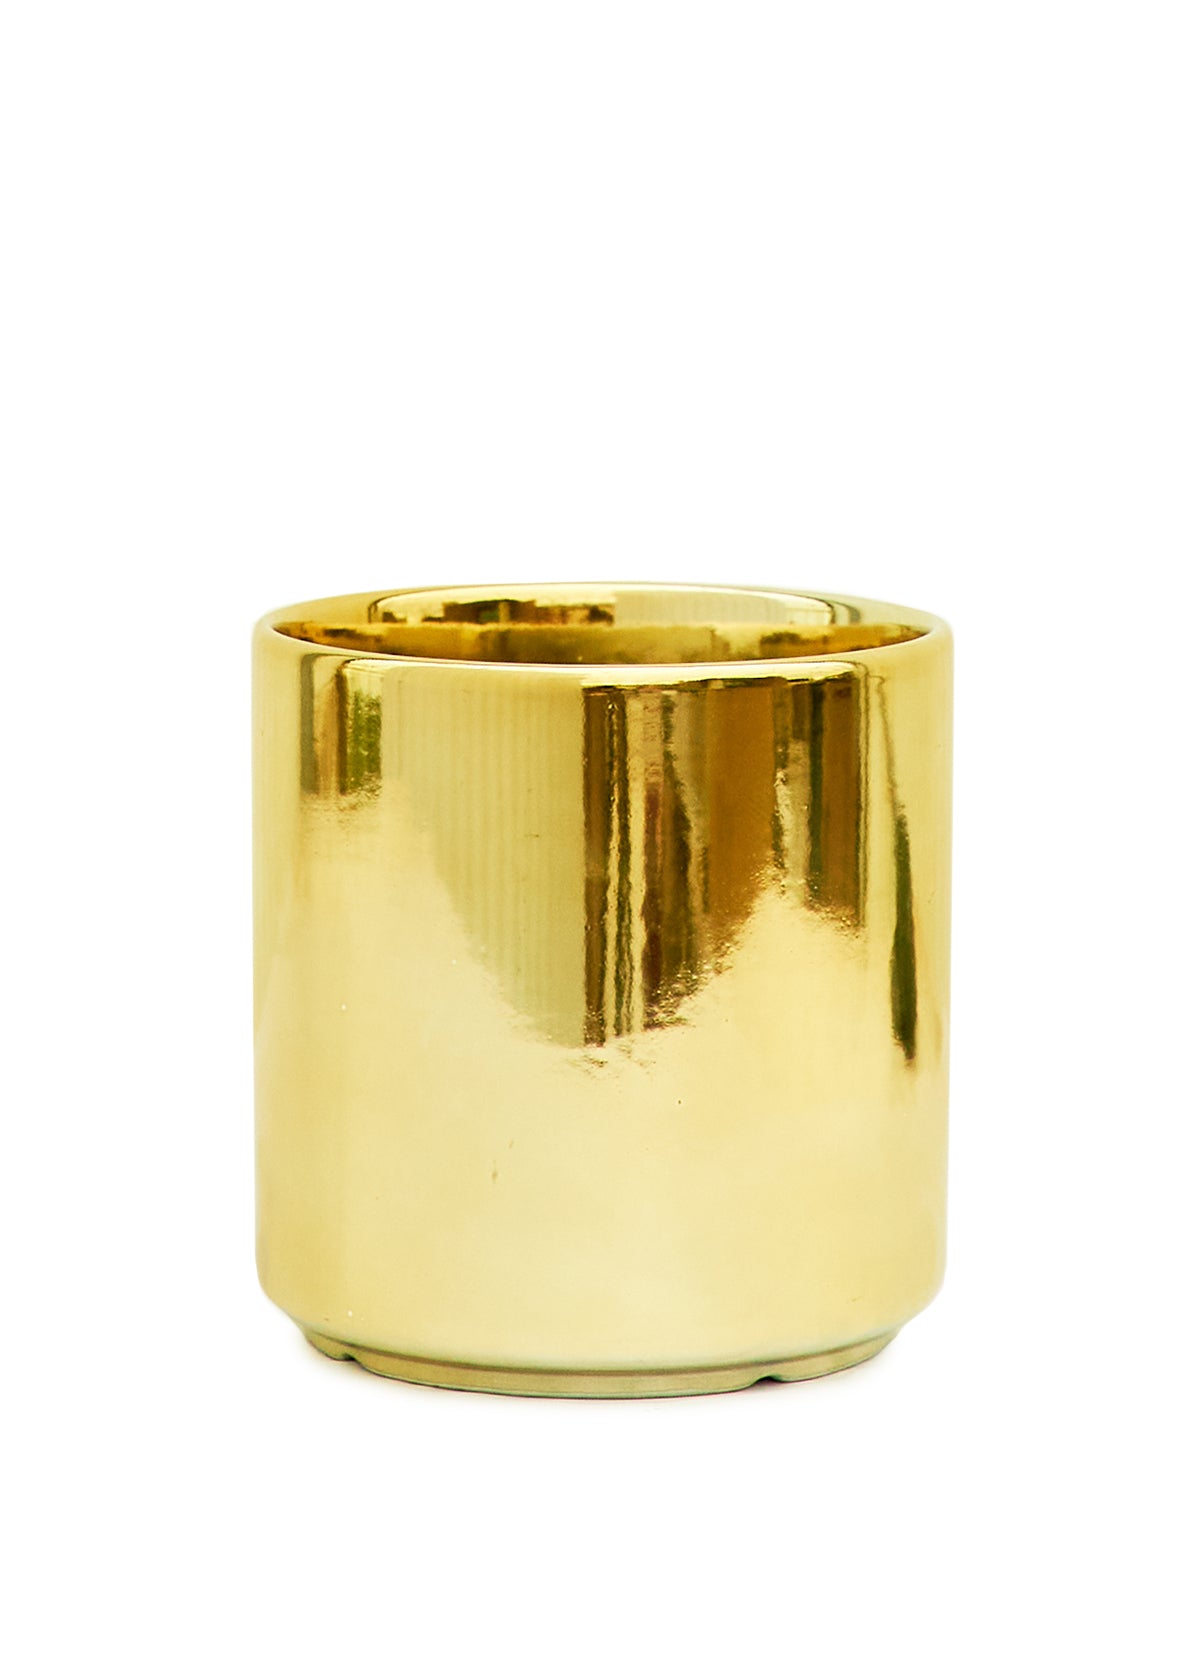 Cylindrical Ceramic Planter, Gold 7" Wide